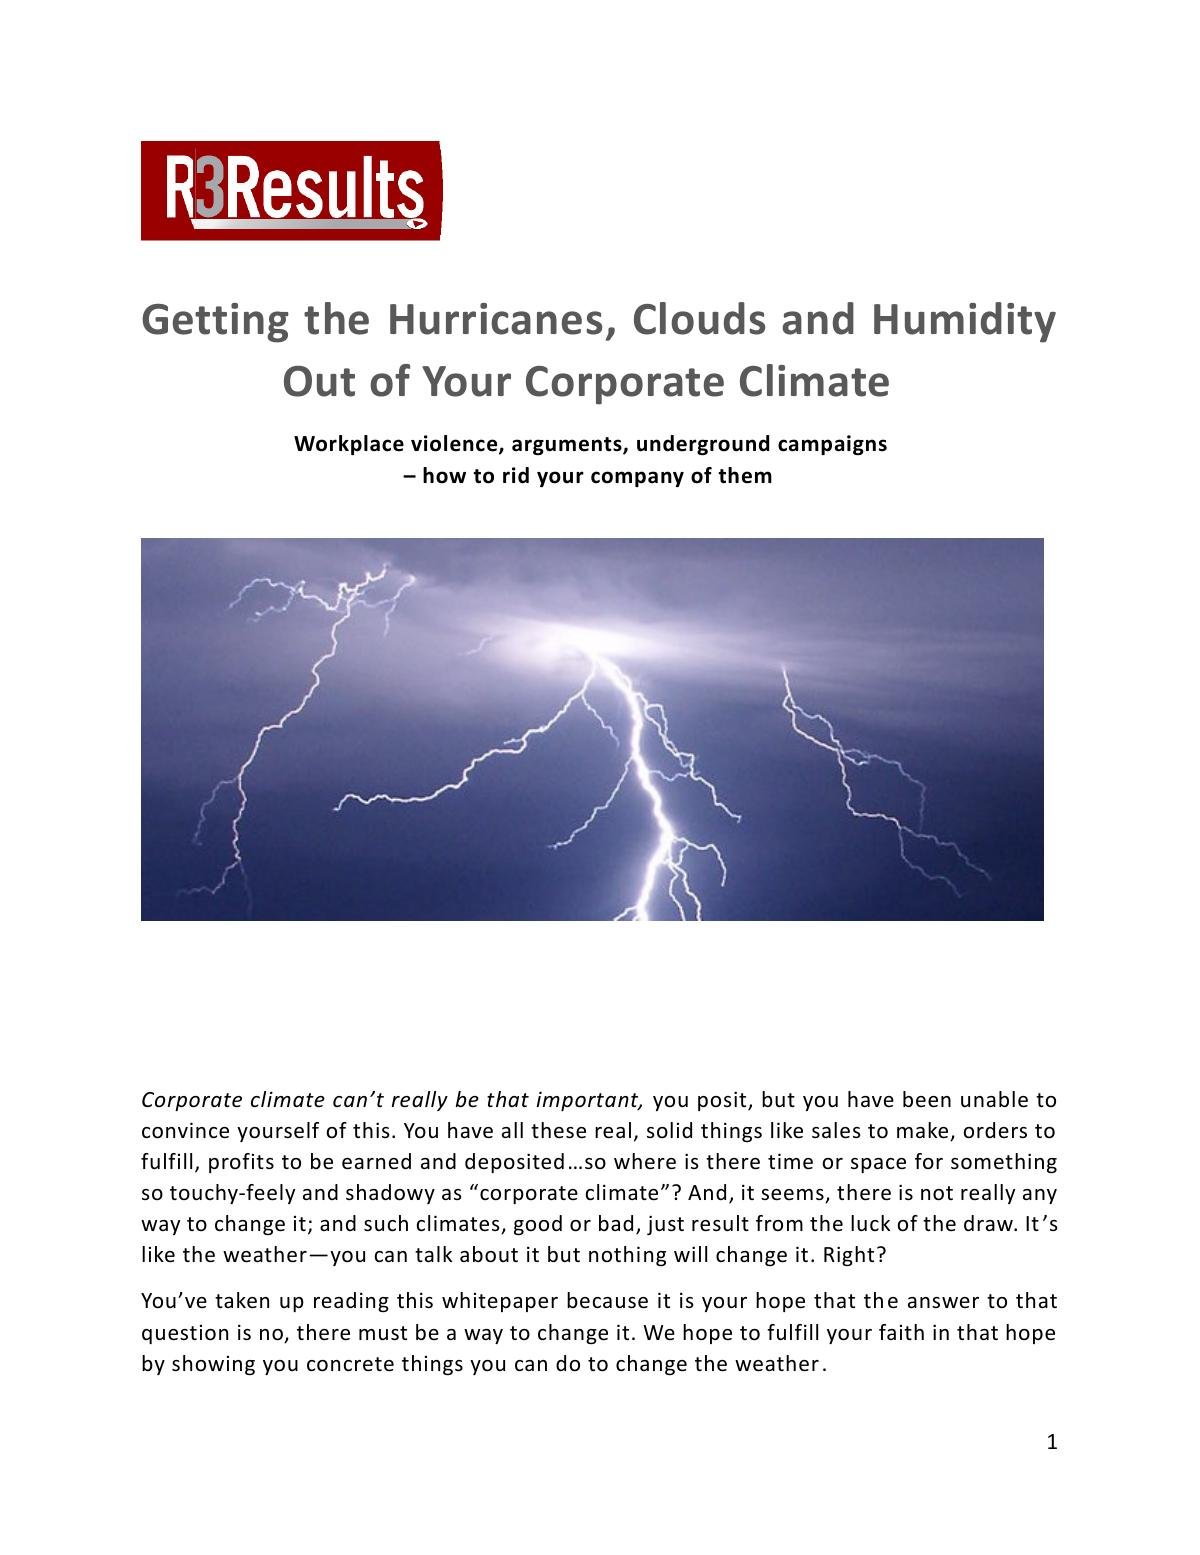 Getting the Hurricanes, Clouds and Humidity Out of Your Corporate Climate